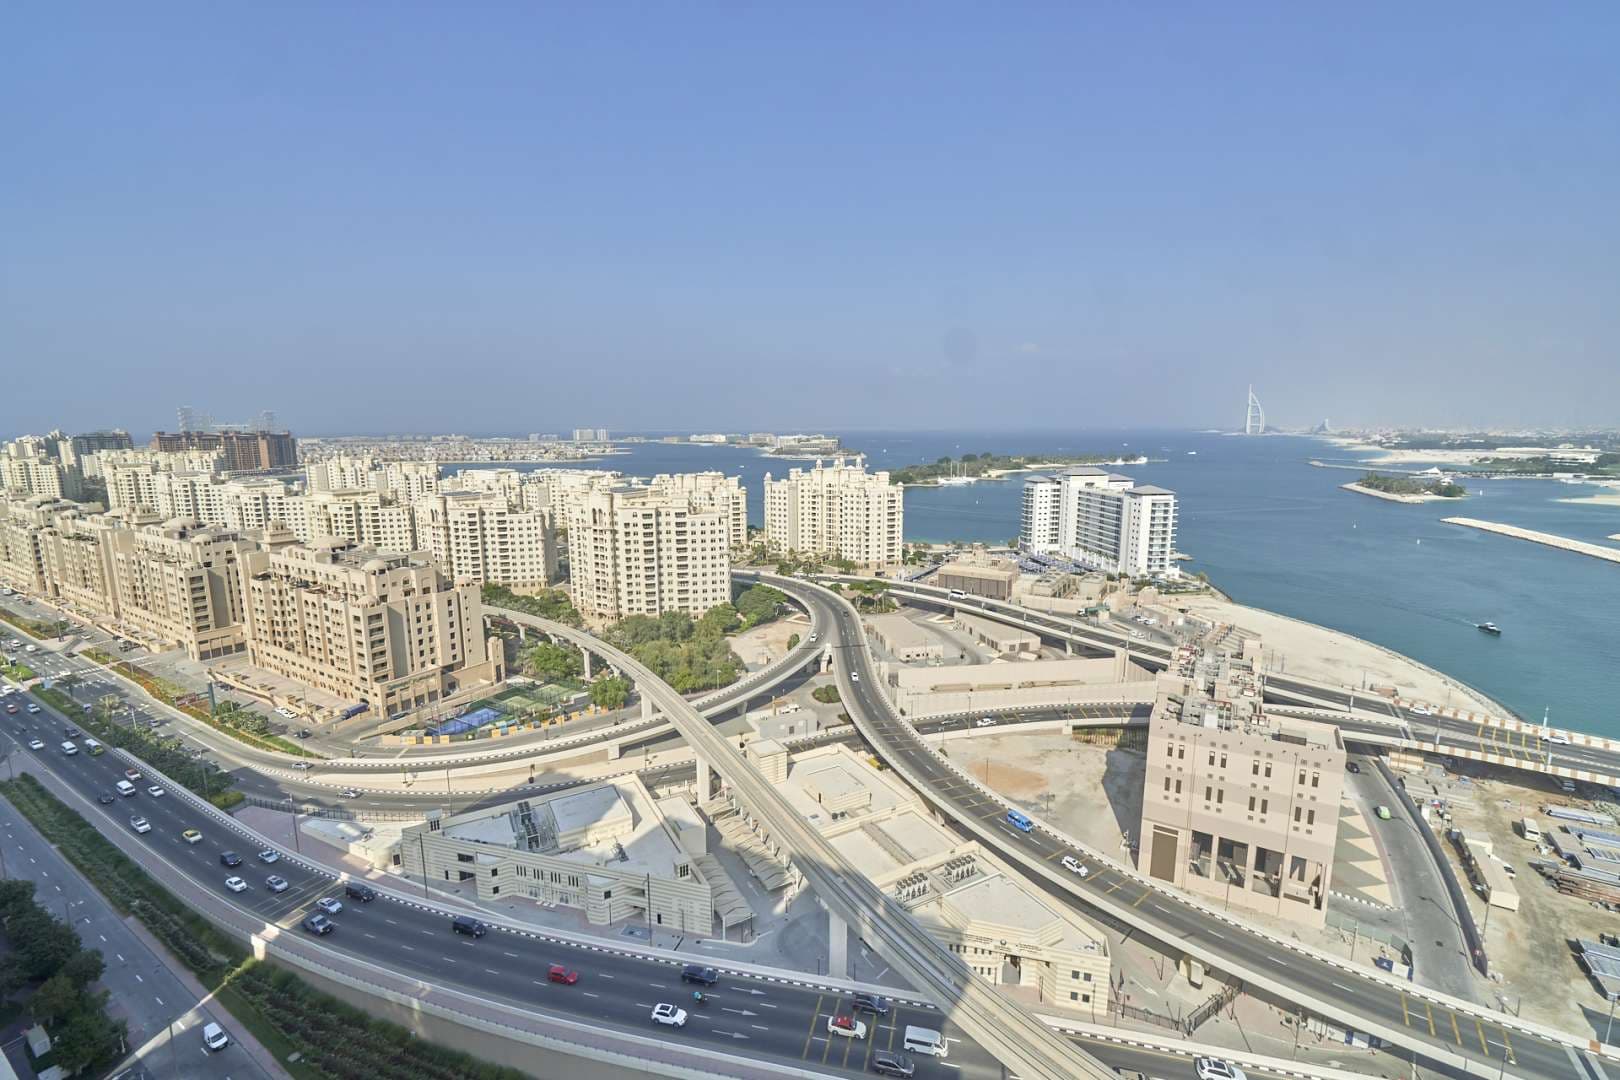 4 Bedroom Penthouse For Sale One At Palm Jumeirah Lp0102 101a370e8b7bd300.jpg